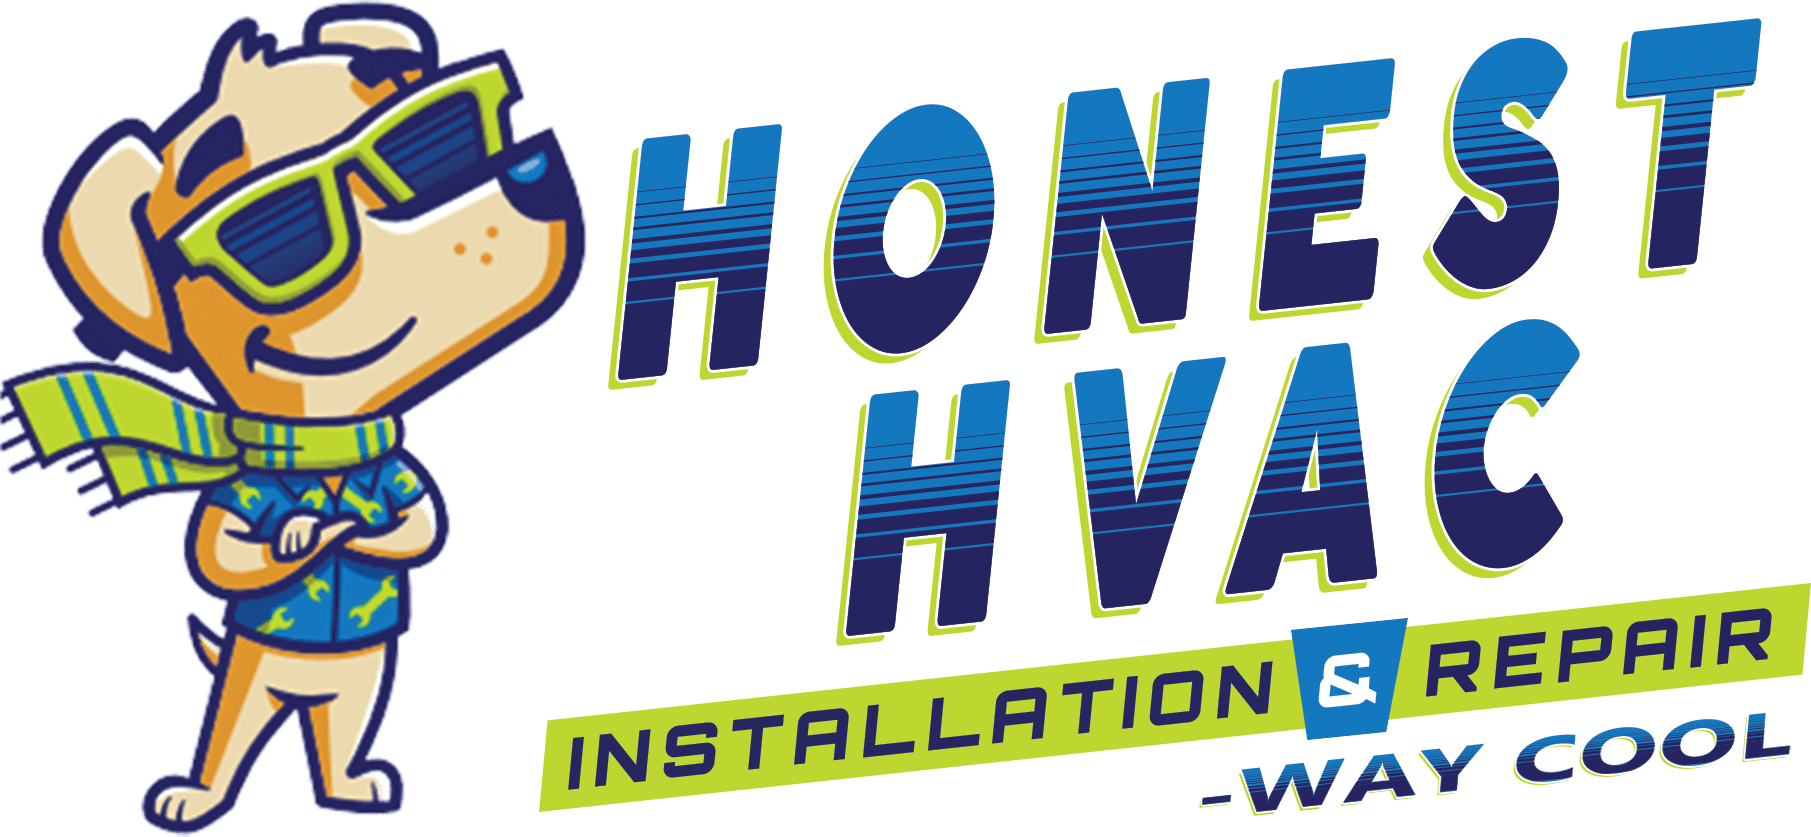 Honest HVAC Installation & Repair - Way Cool Expands Services with New Office in Glendale, AZ